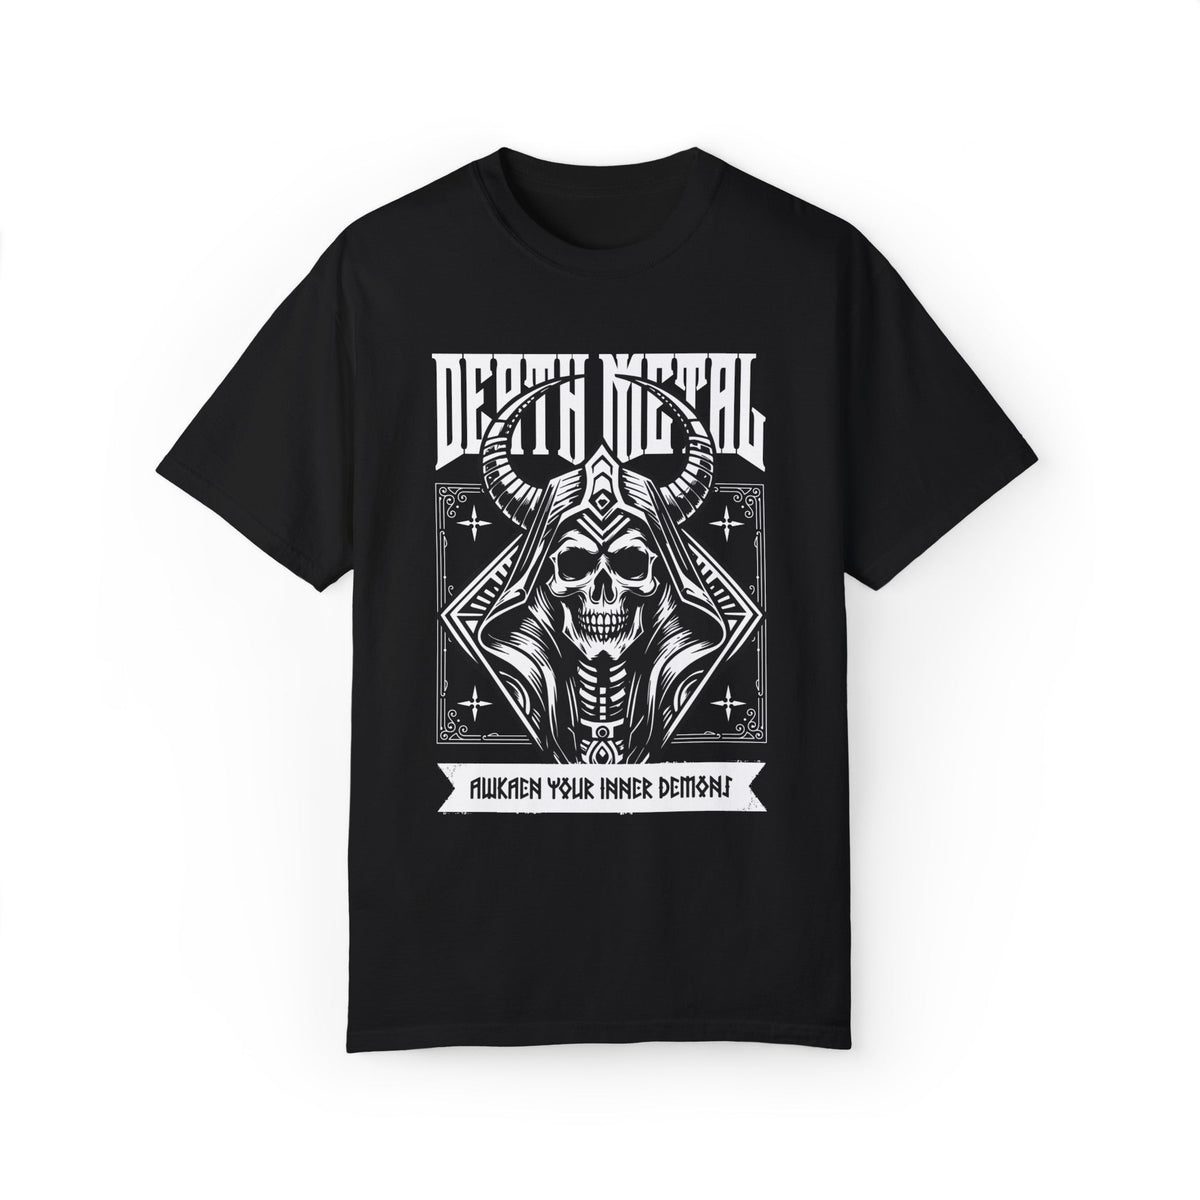 Death Metal Oversized Beefy Tee - Goth Cloth Co.T - Shirt13627424990288678383